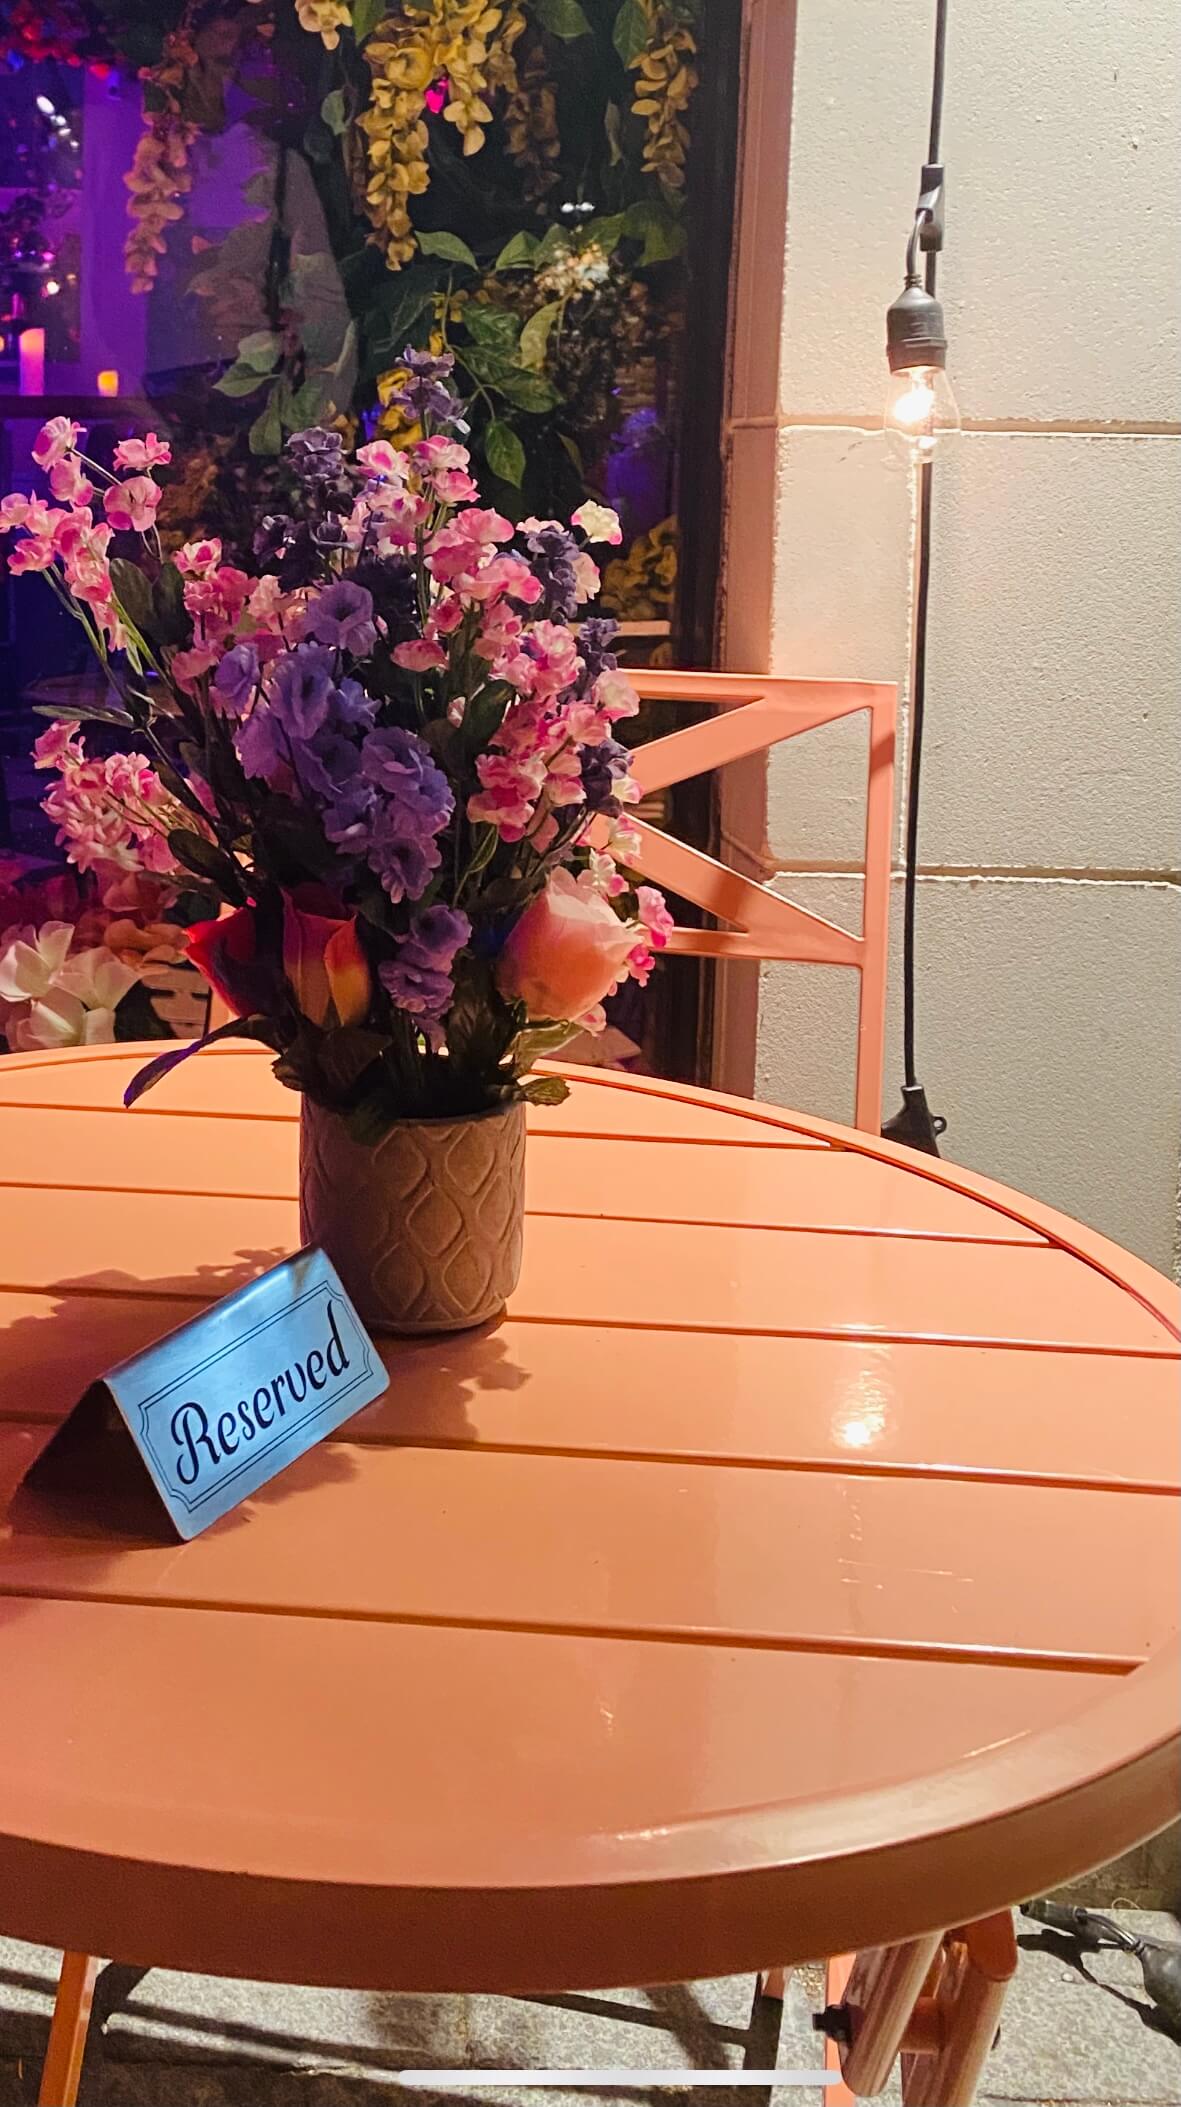 Image of a dinner table with flower and a reserved sign